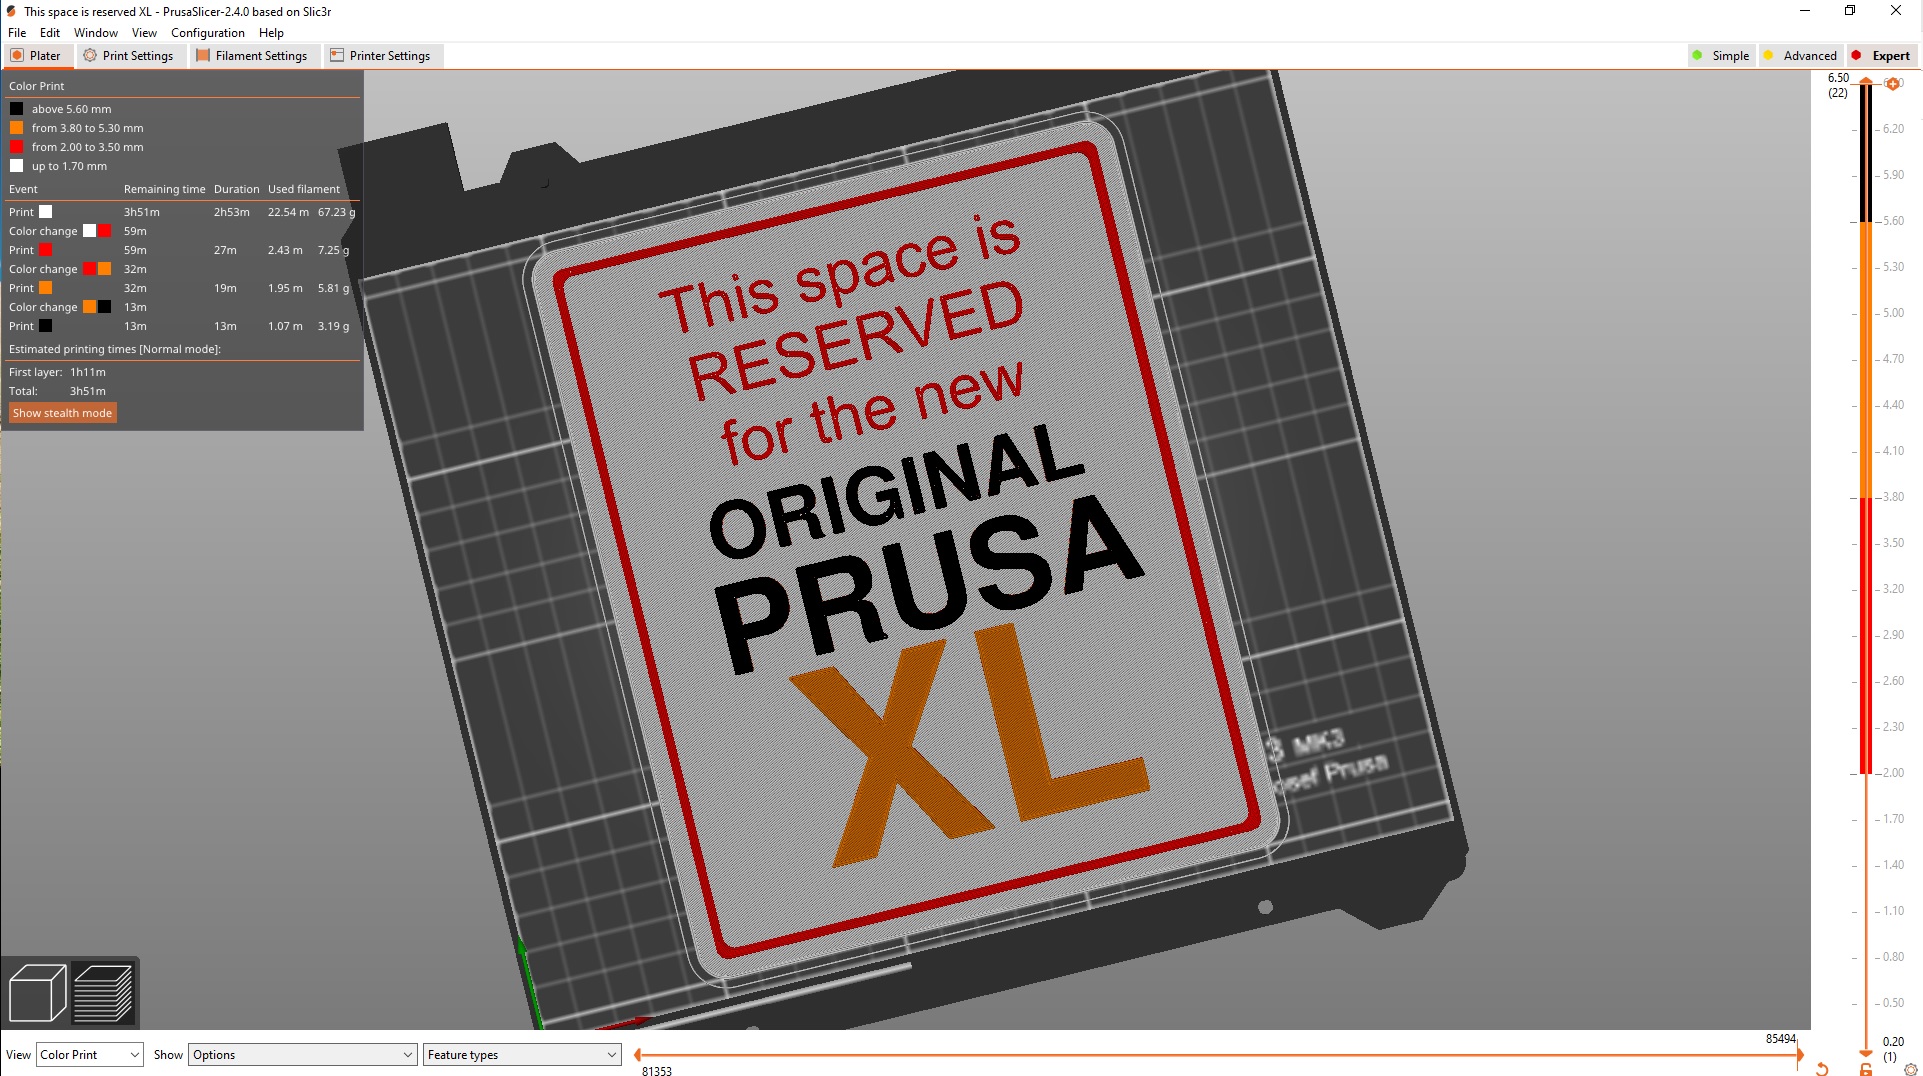 This space is reserved for the Prusa XL